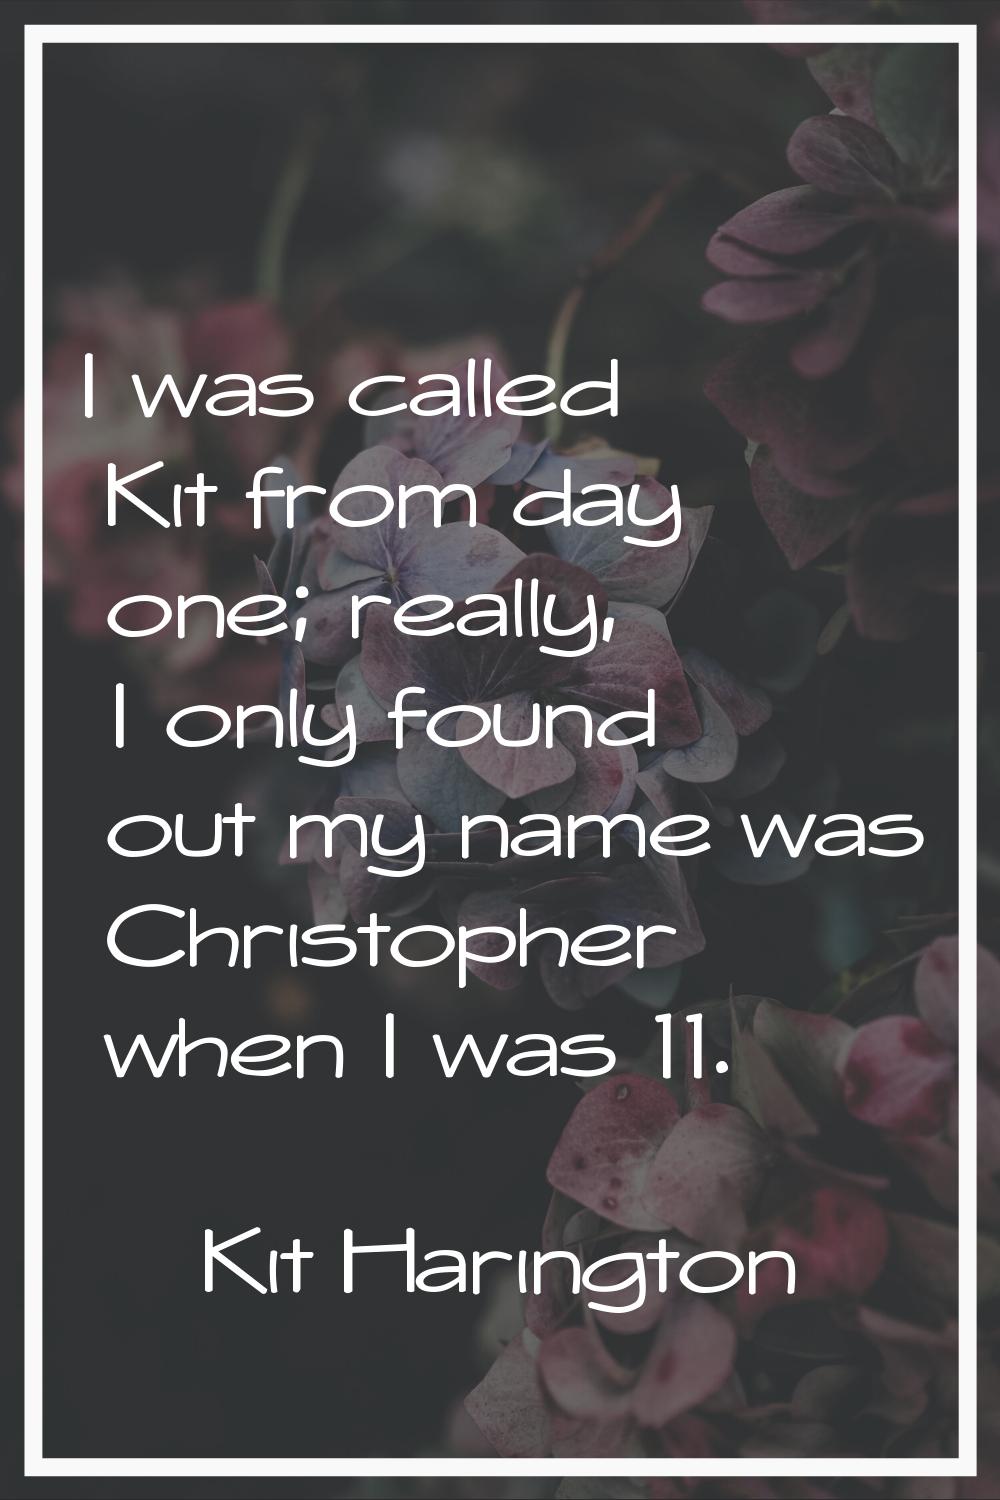 I was called Kit from day one; really, I only found out my name was Christopher when I was 11.